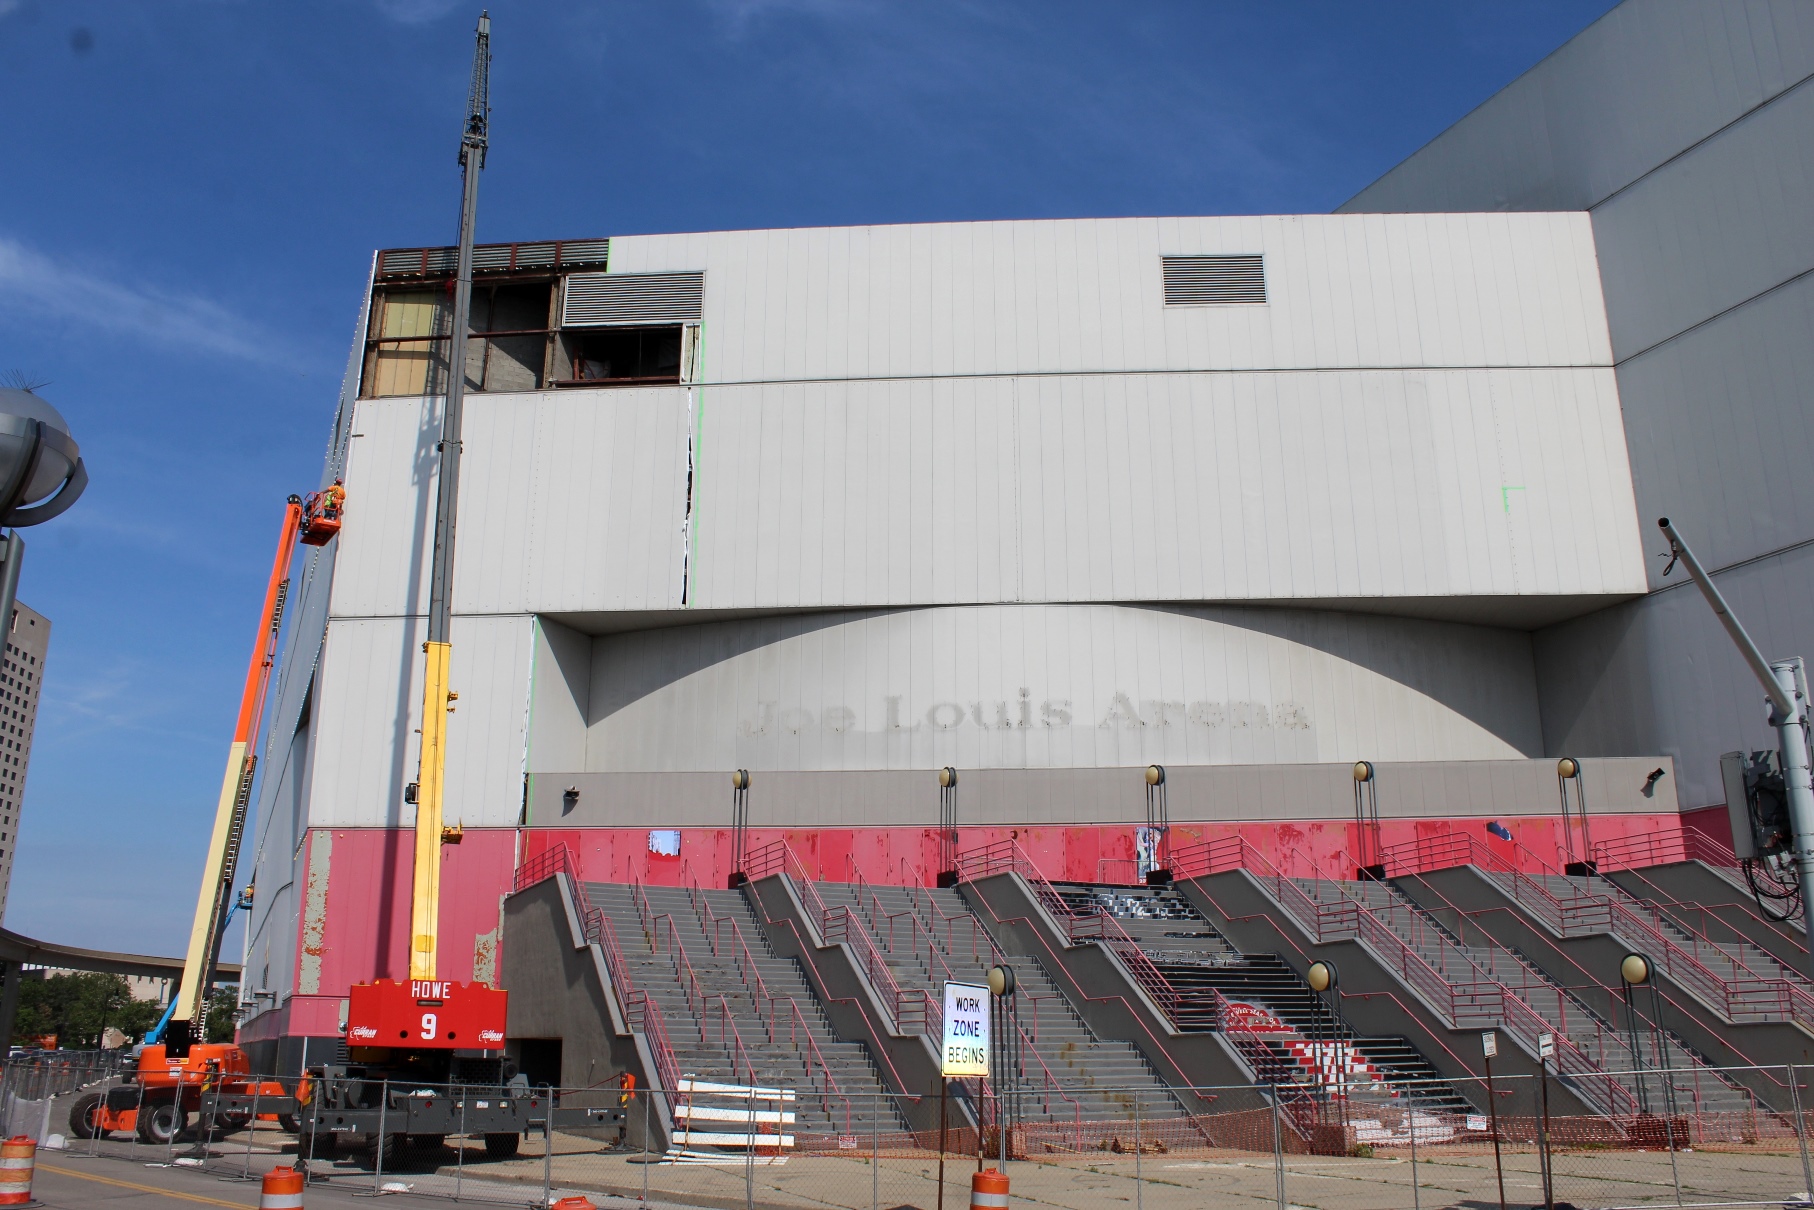 Construction for new tower begins on Joe Louis Arena site : r/Detroit